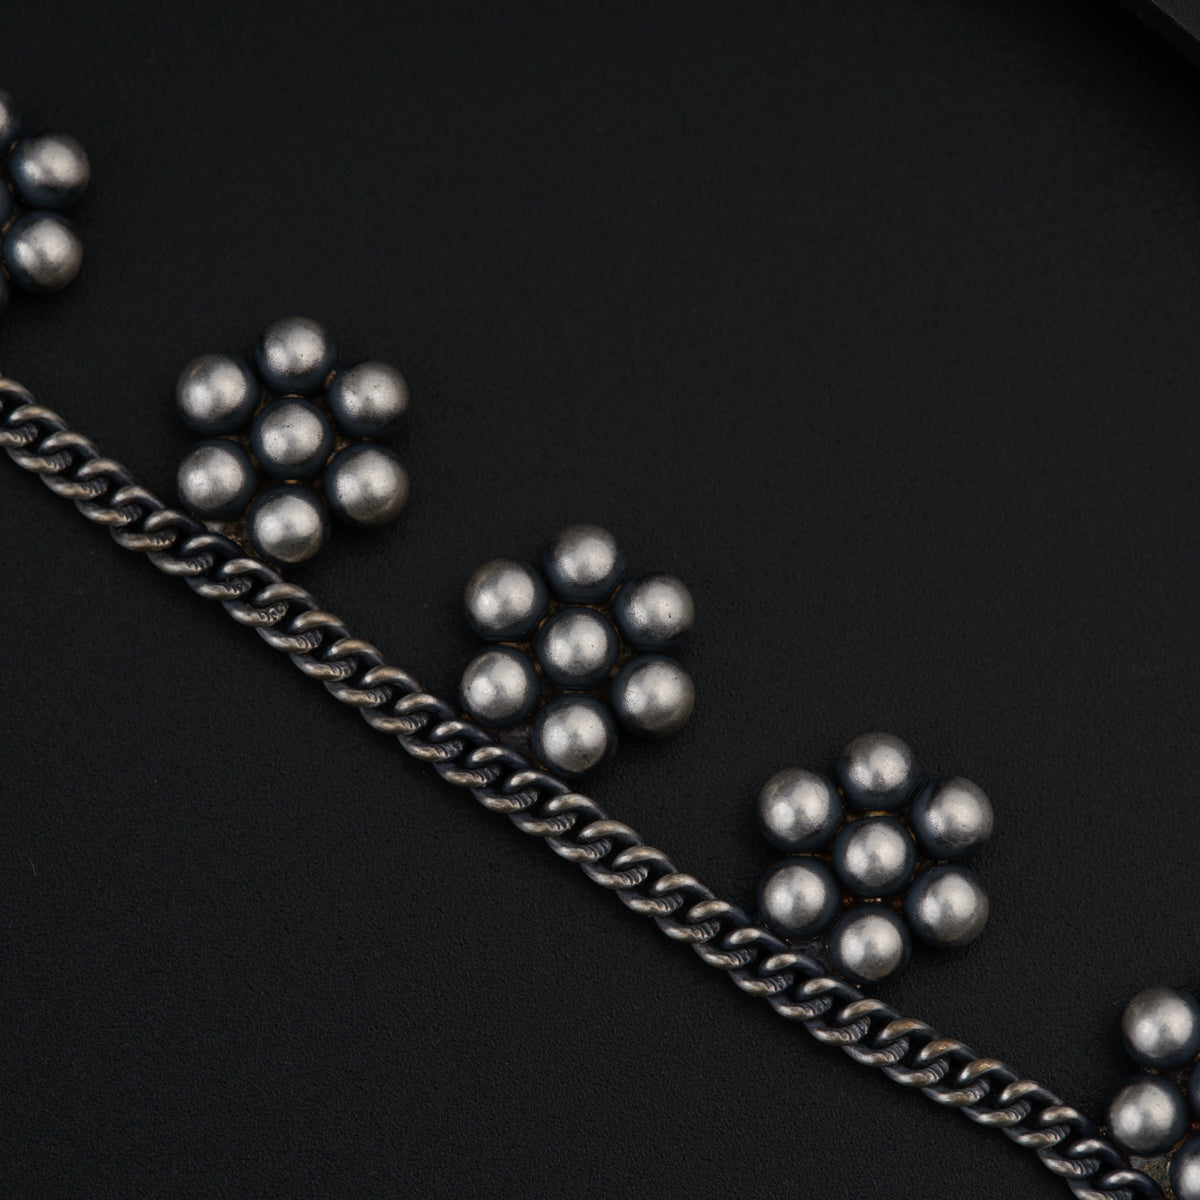 a bunch of balls and chains on a black surface